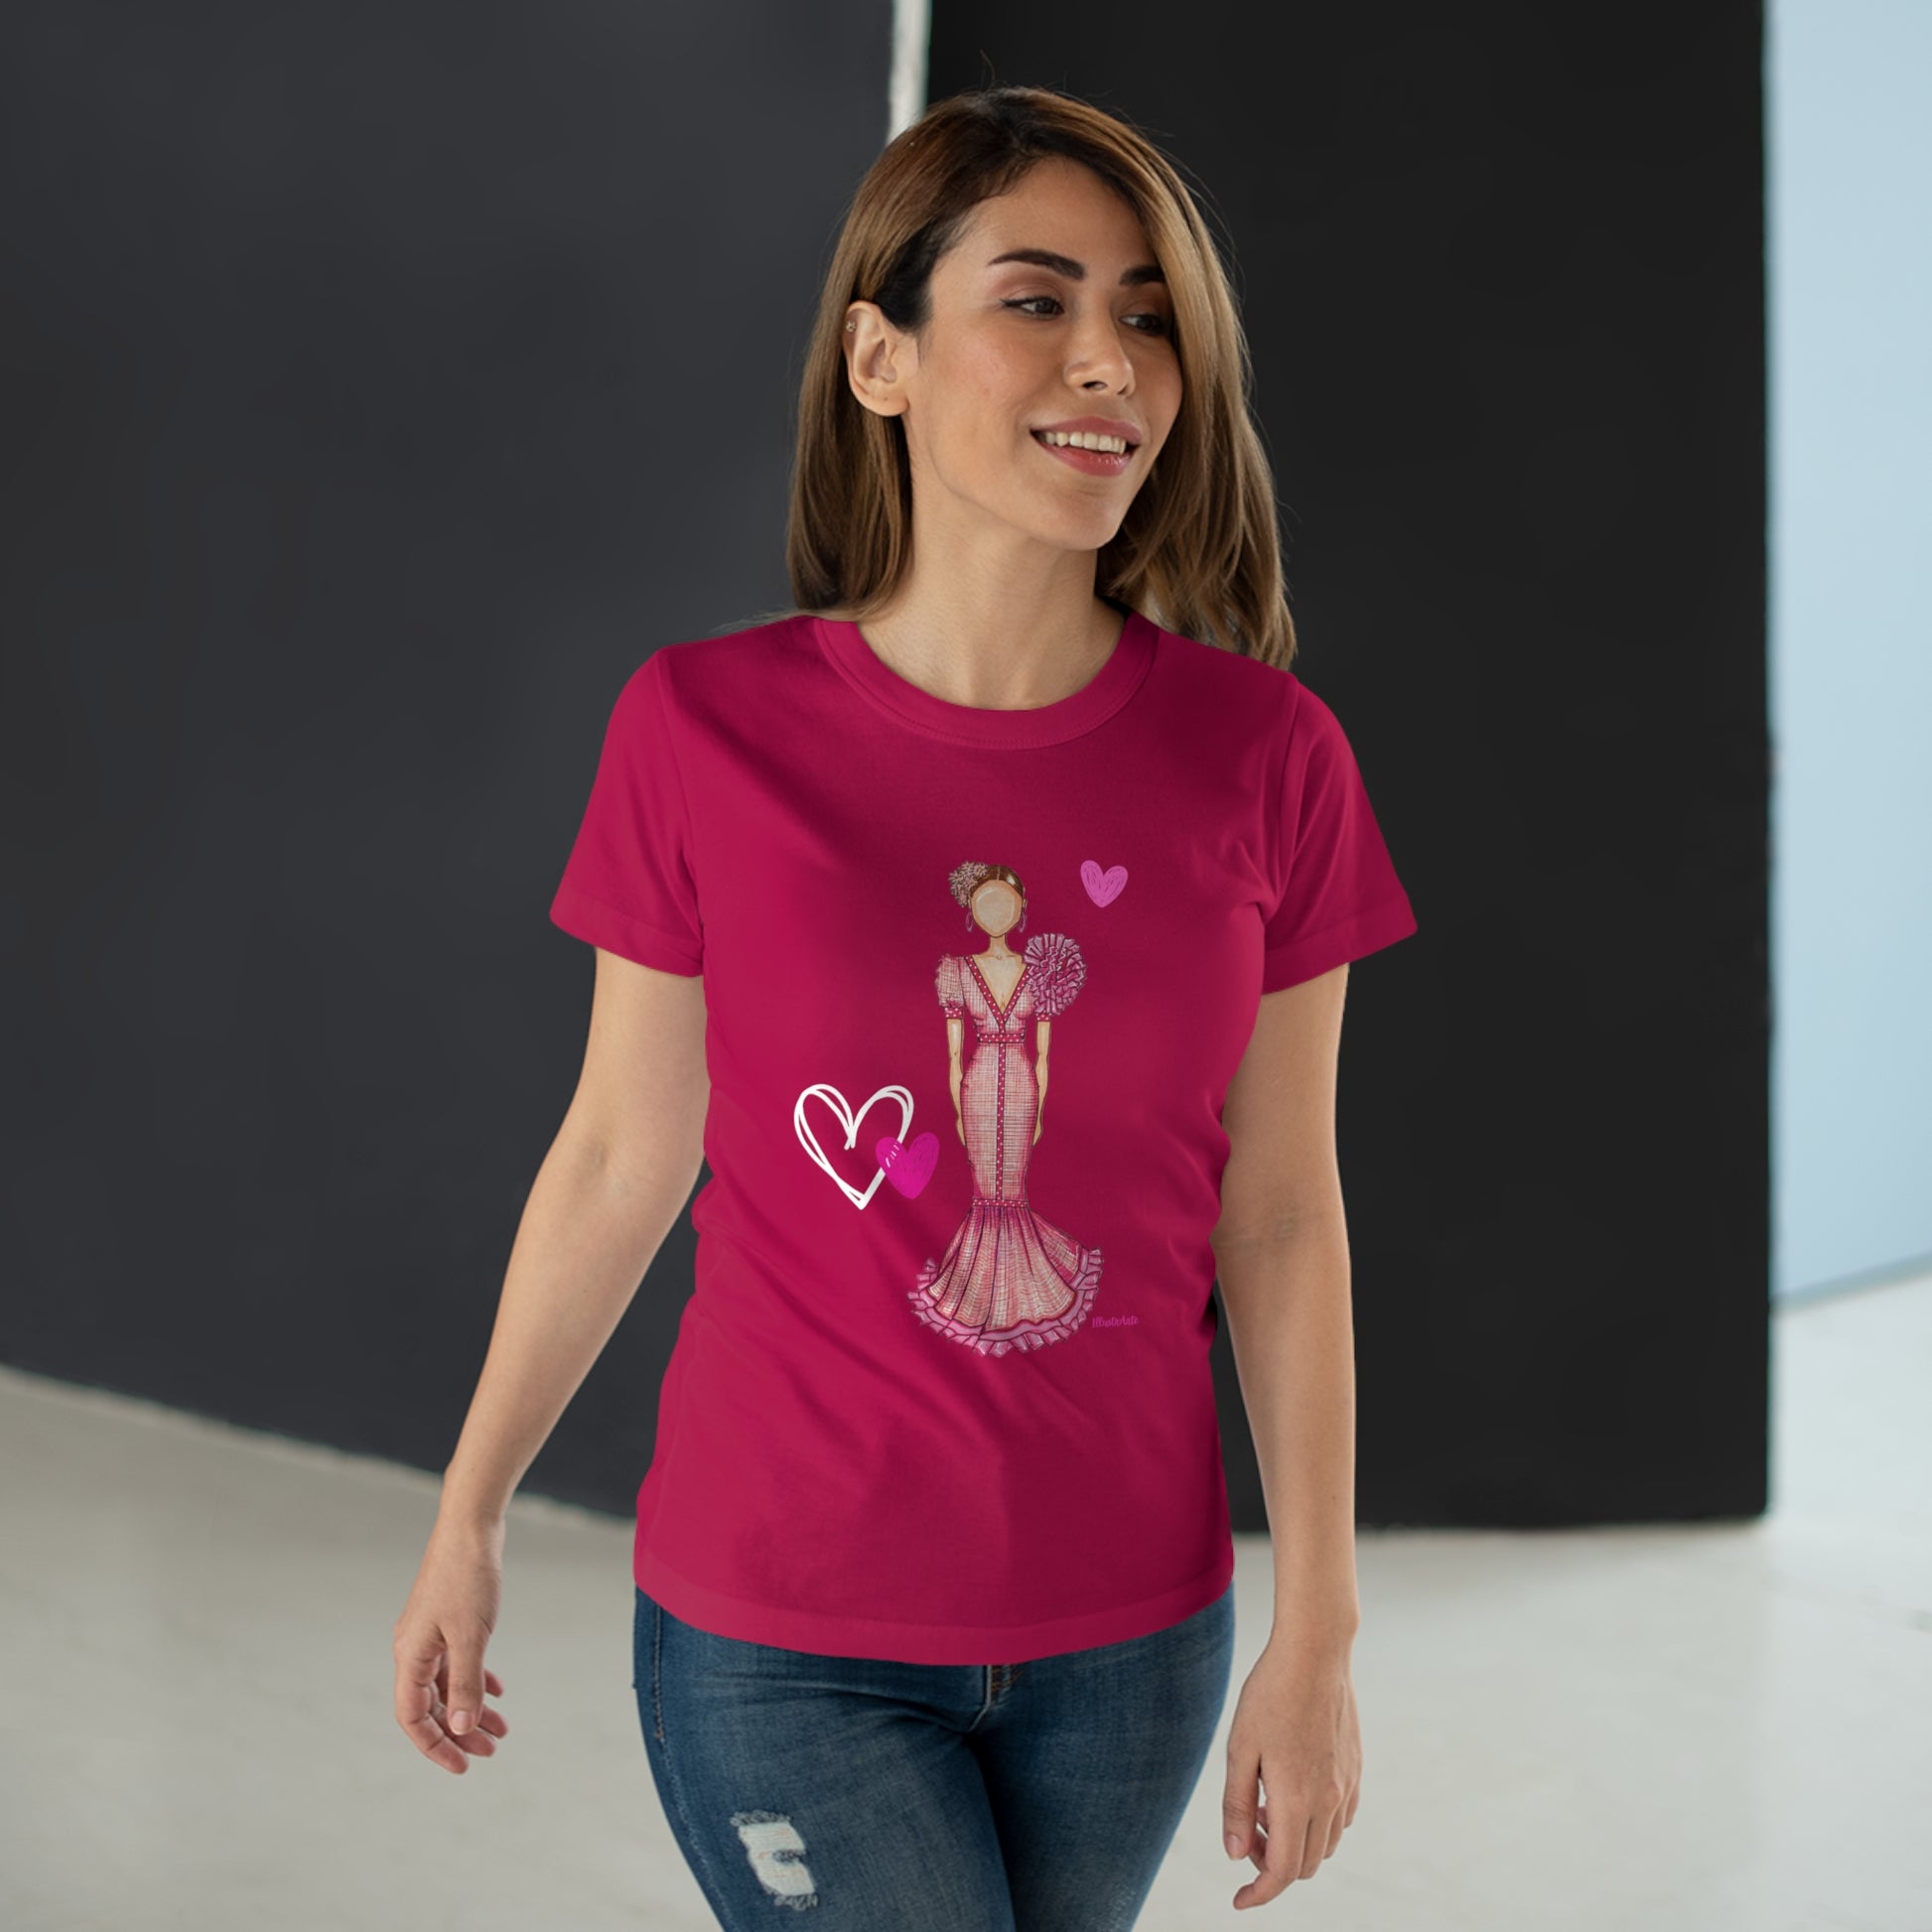 a woman wearing a pink t - shirt with a dress and heart on it